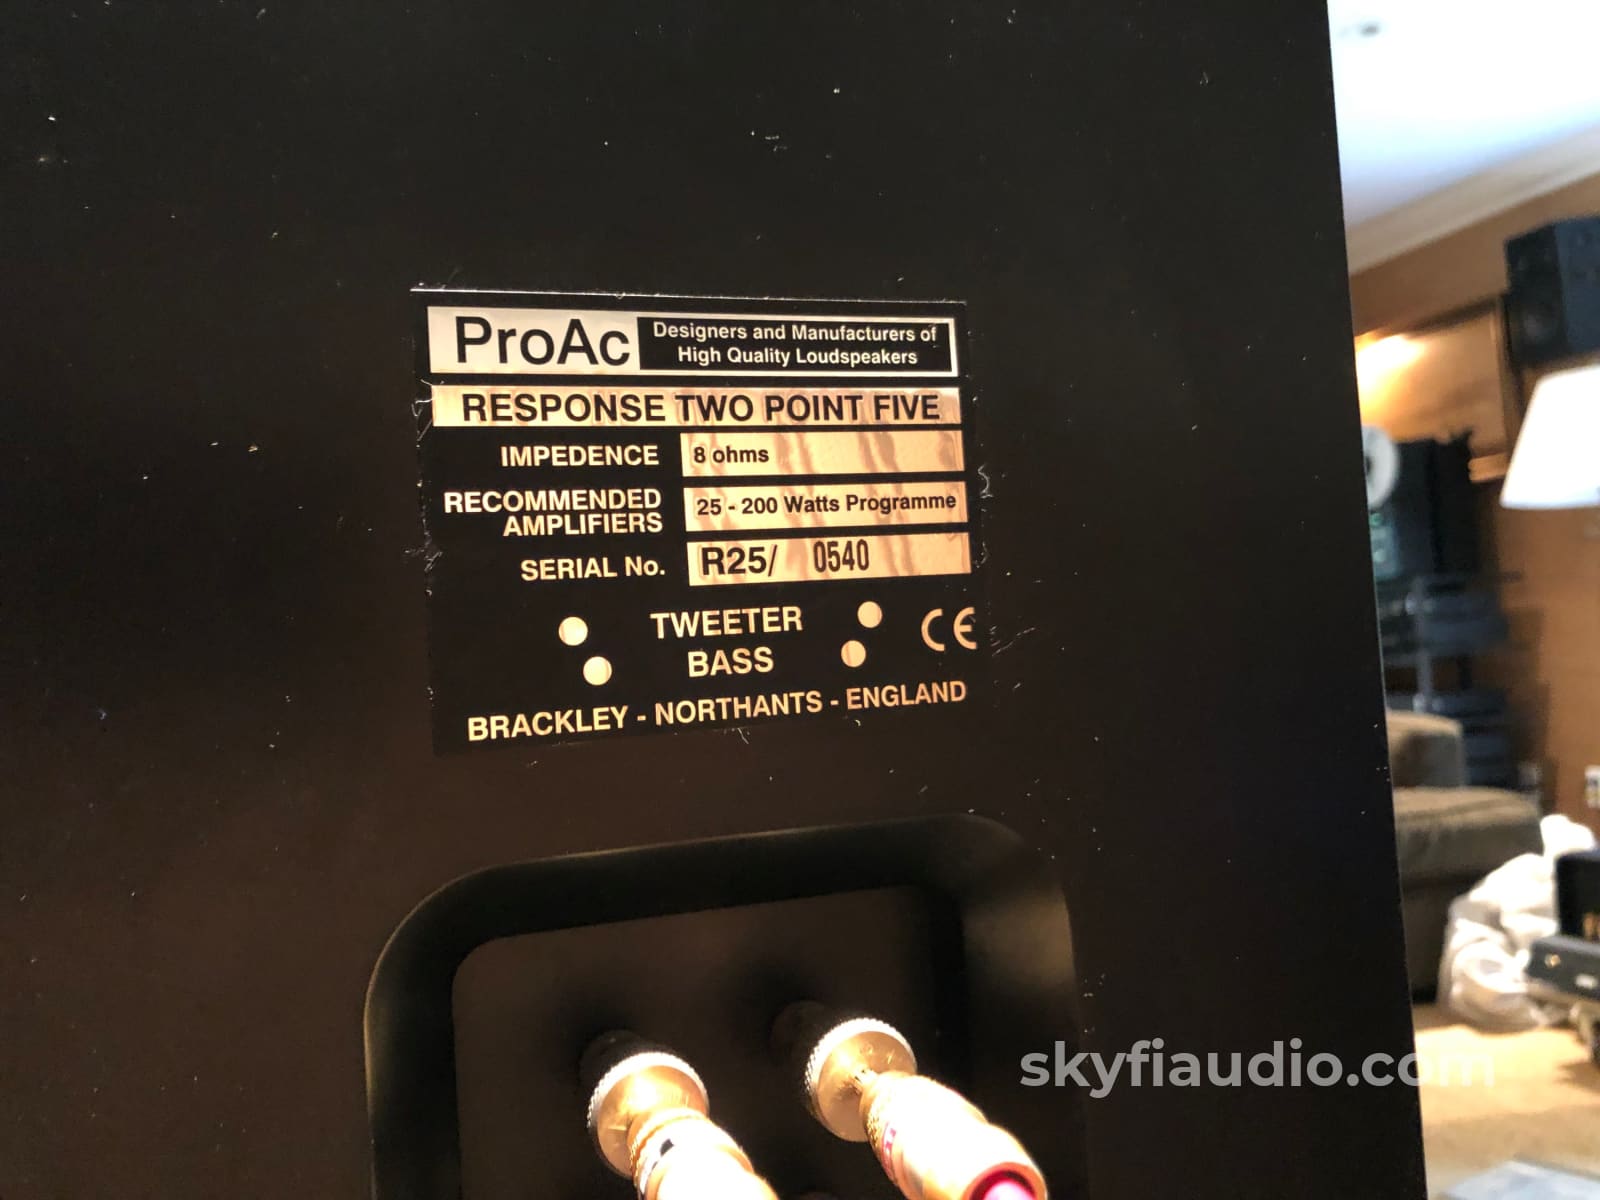 Proac Response Two Point Five (2.5) Speakers - Boxed